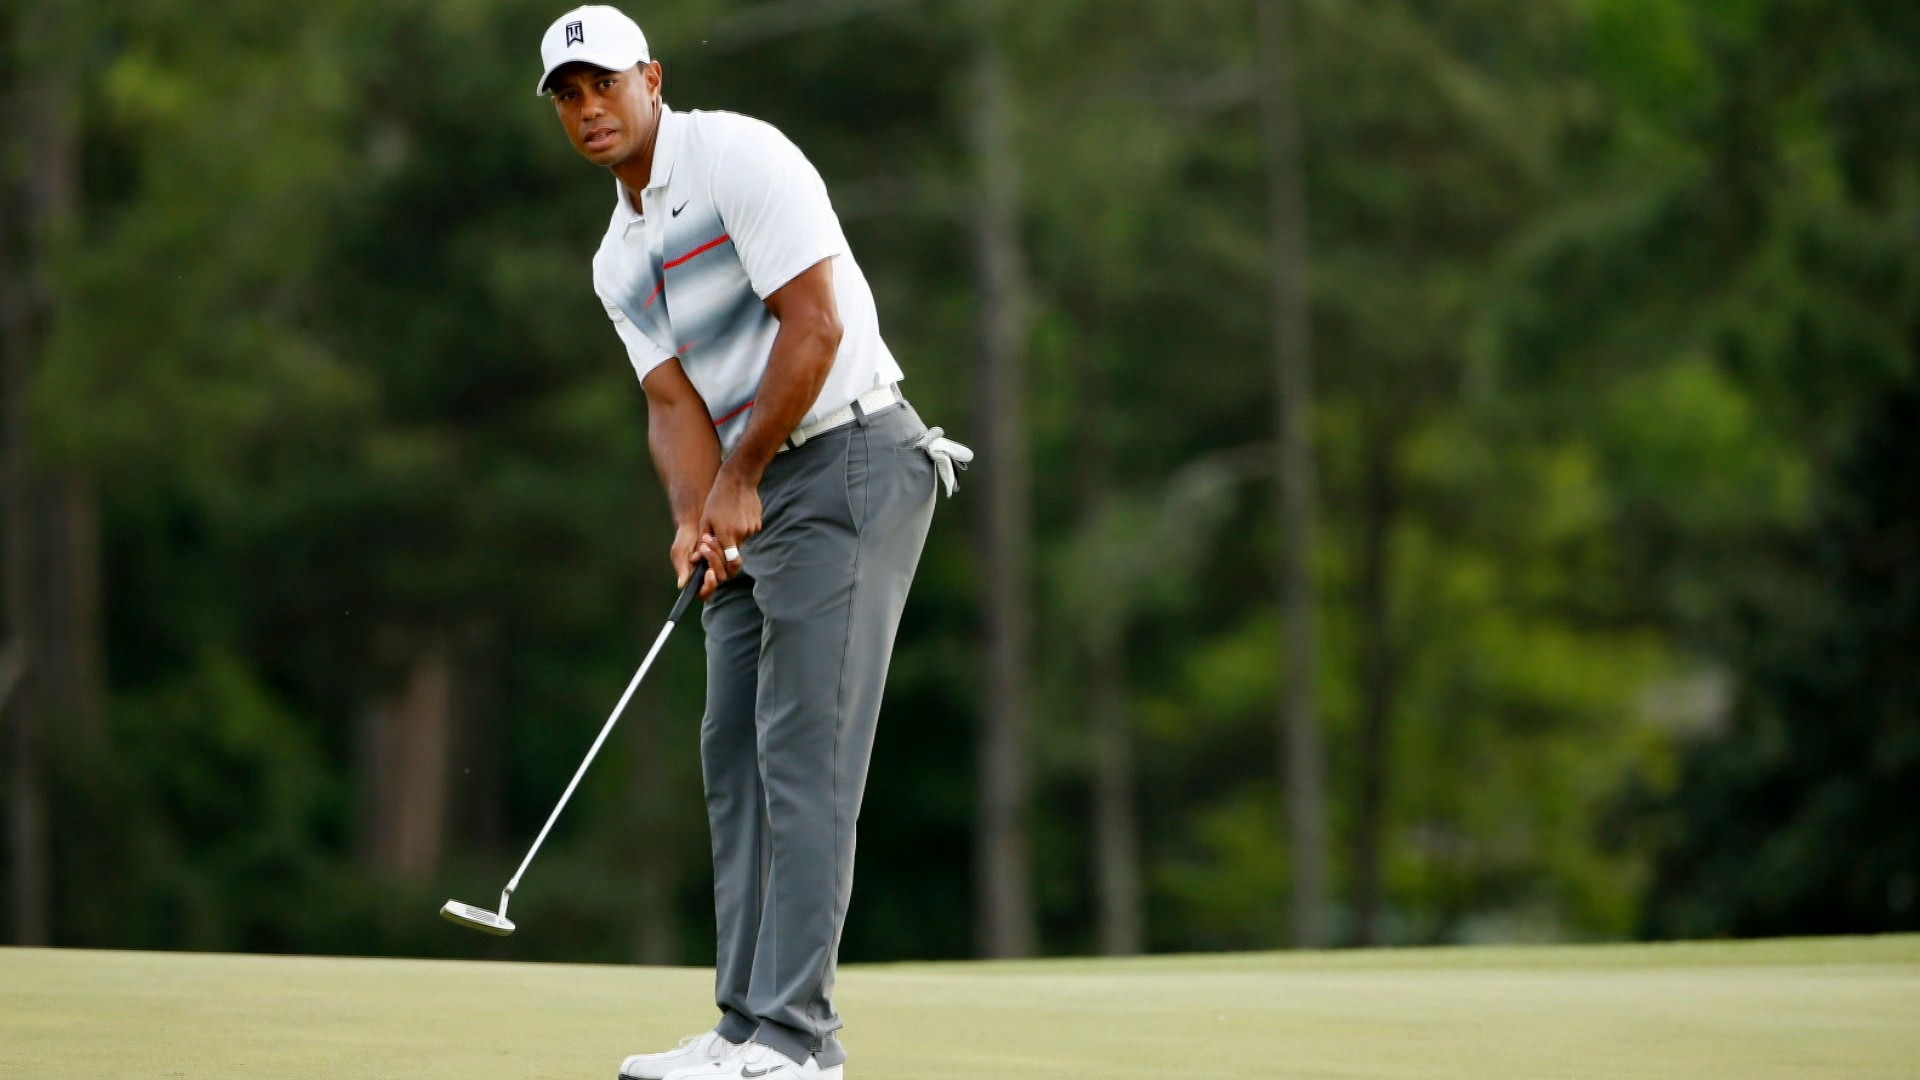 1920x1080 Cook: Tiger's short game was 'vintage' in Rd. 1Apr 10, 2015